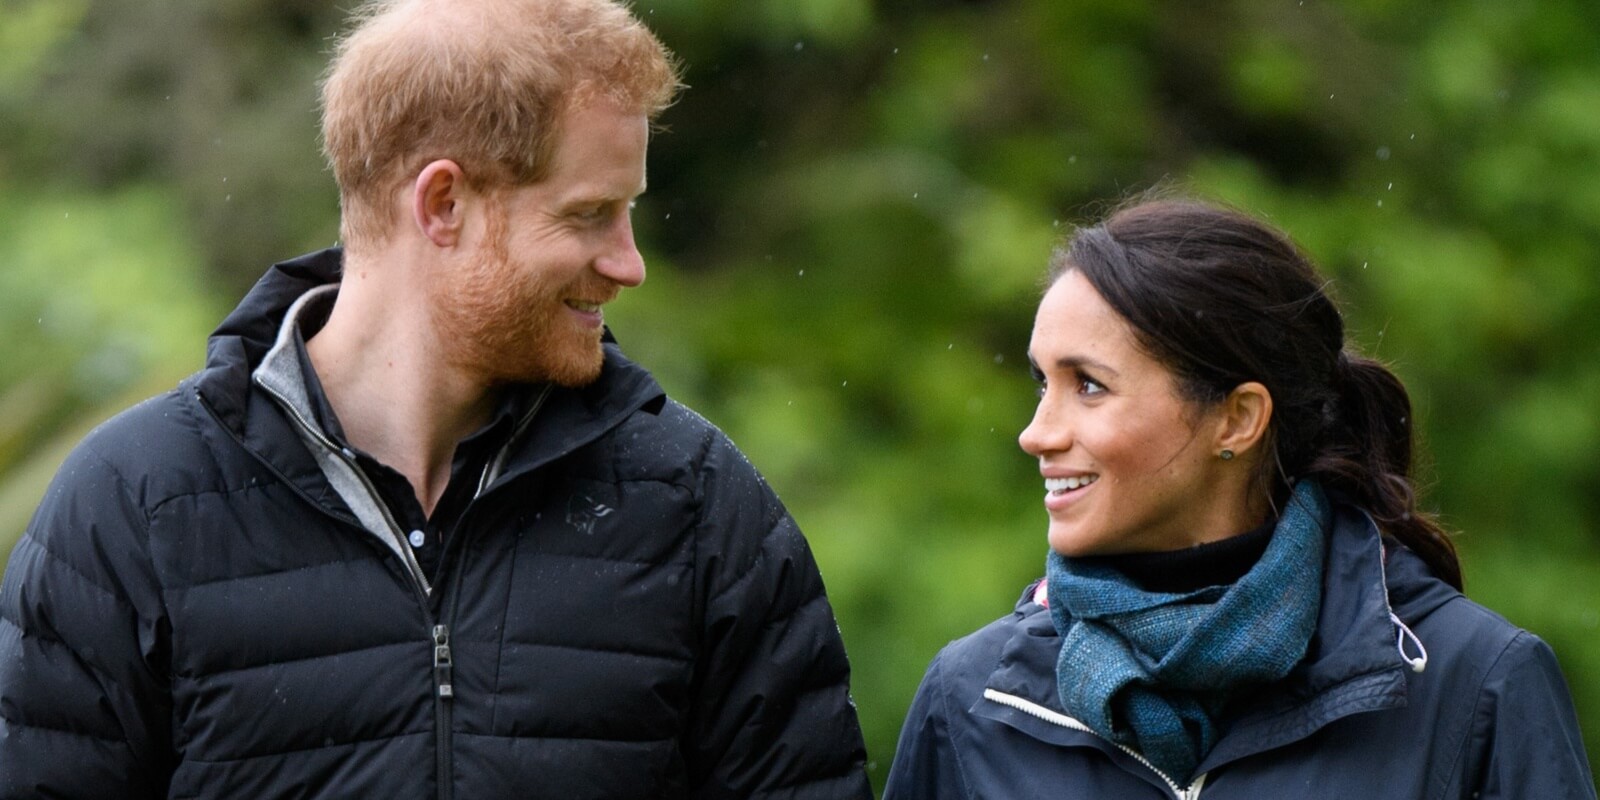 Prince Harry and Meghan Markle visit Wellington, New Zealand in 2018.